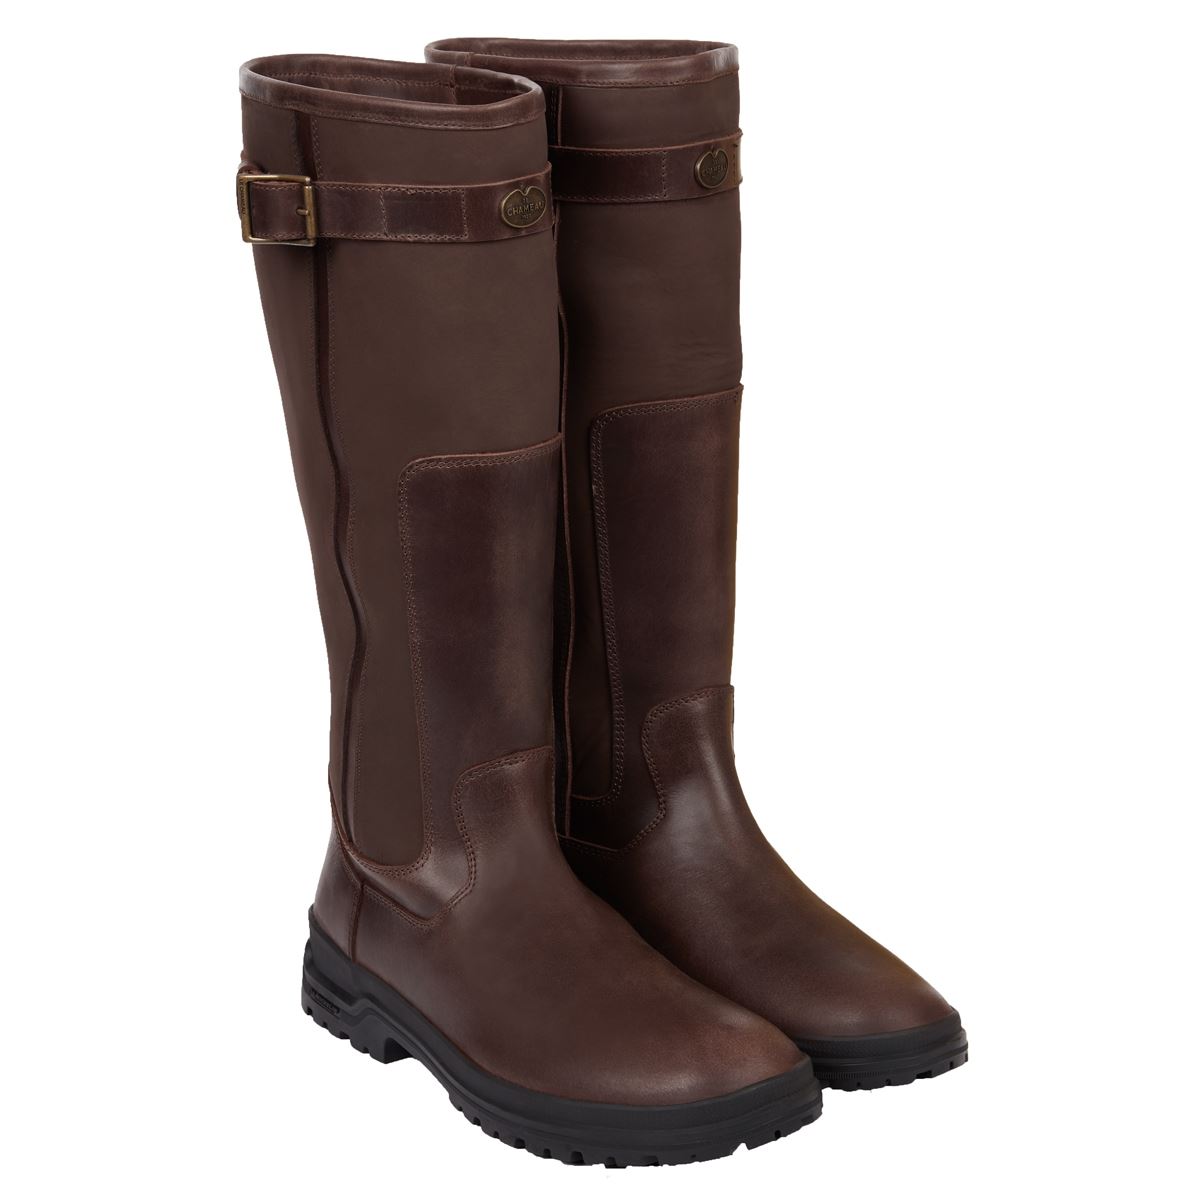 Is the Le Chameau Jameson boot wide fit water-resistant?